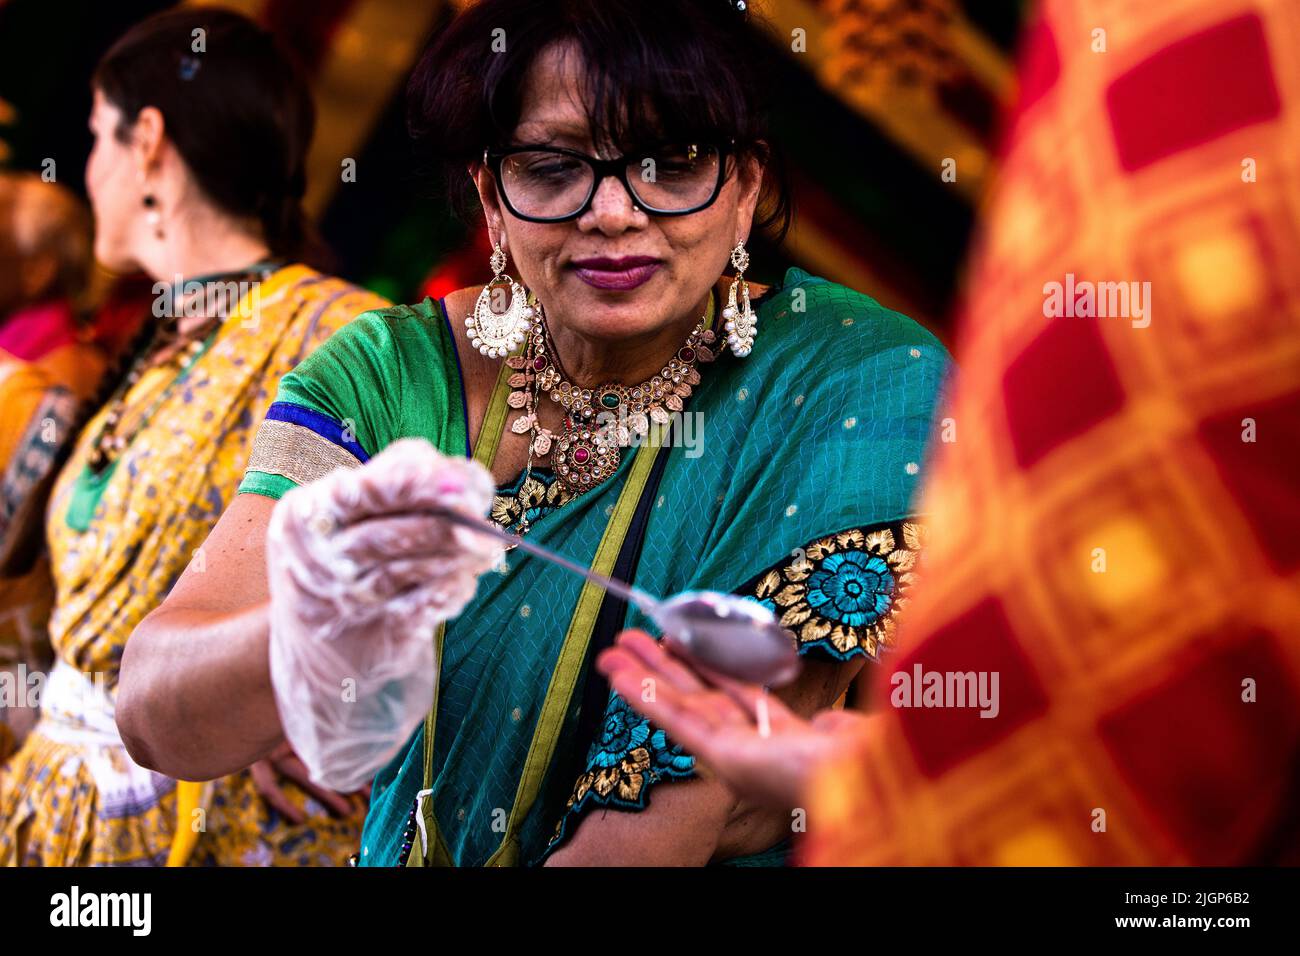 A volunteer serves food to devotees during the celebration. Stock Photo